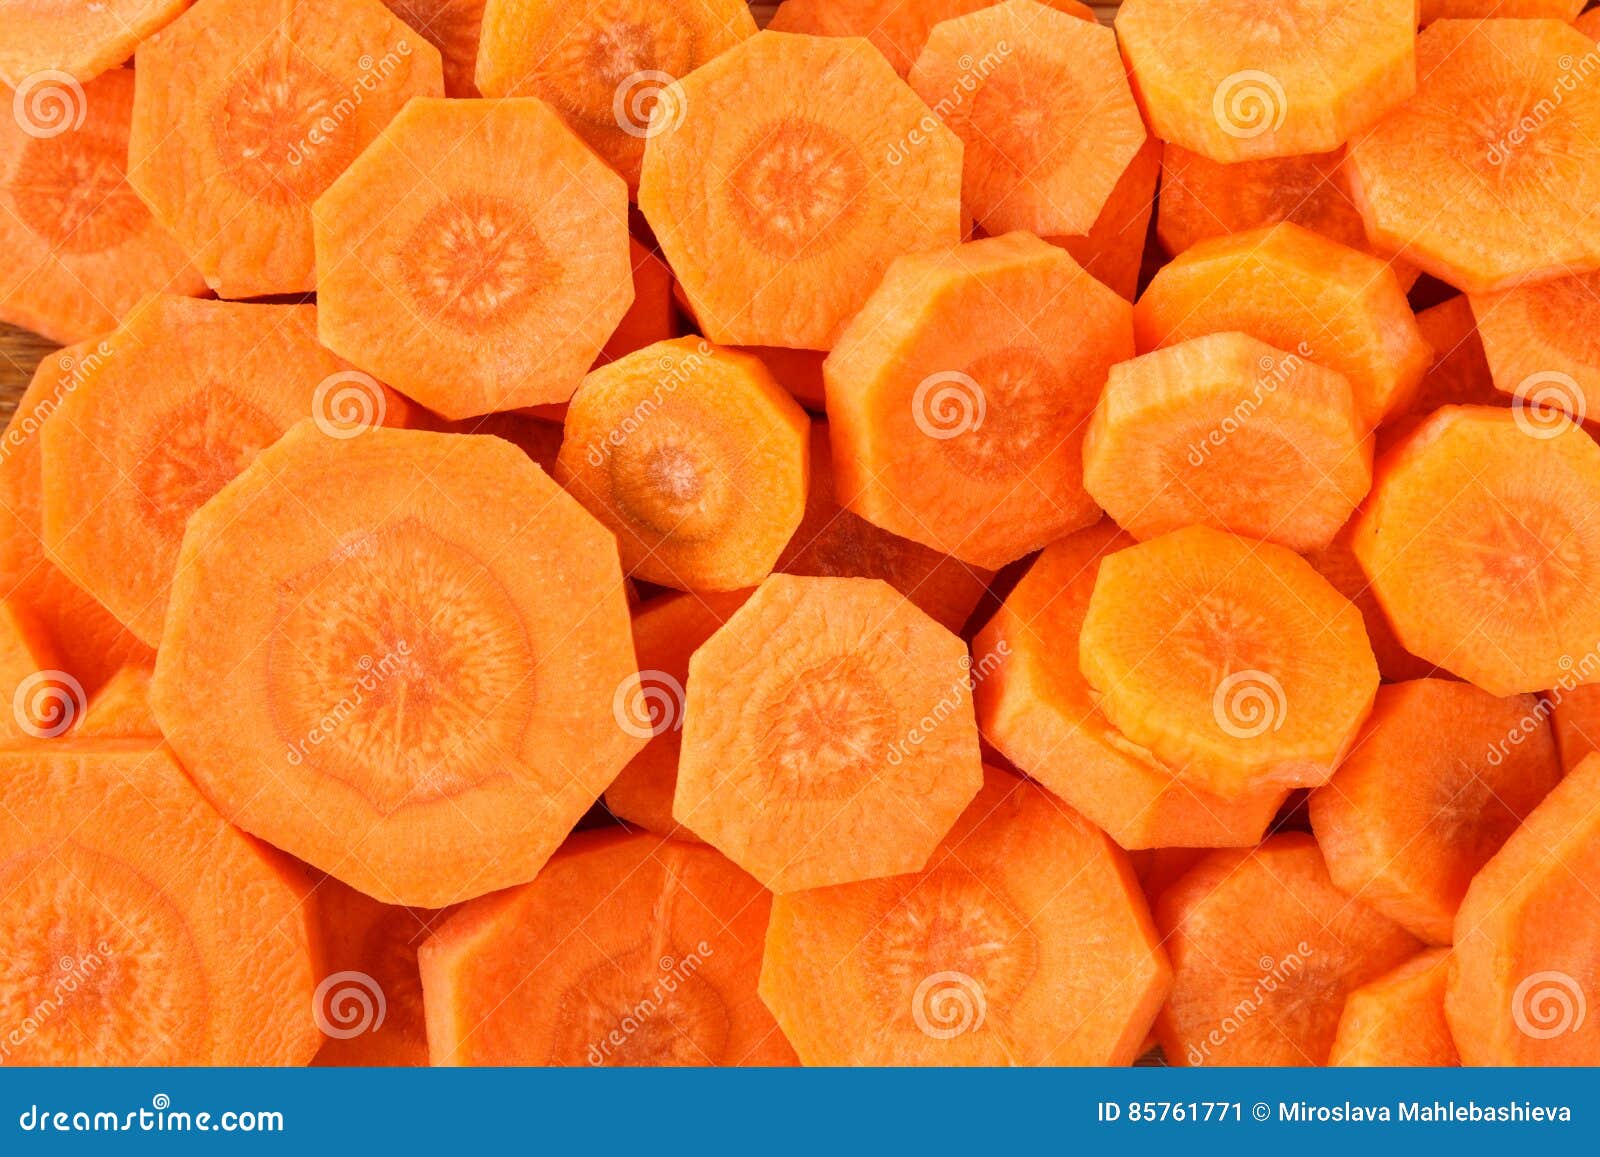 carrot slices background